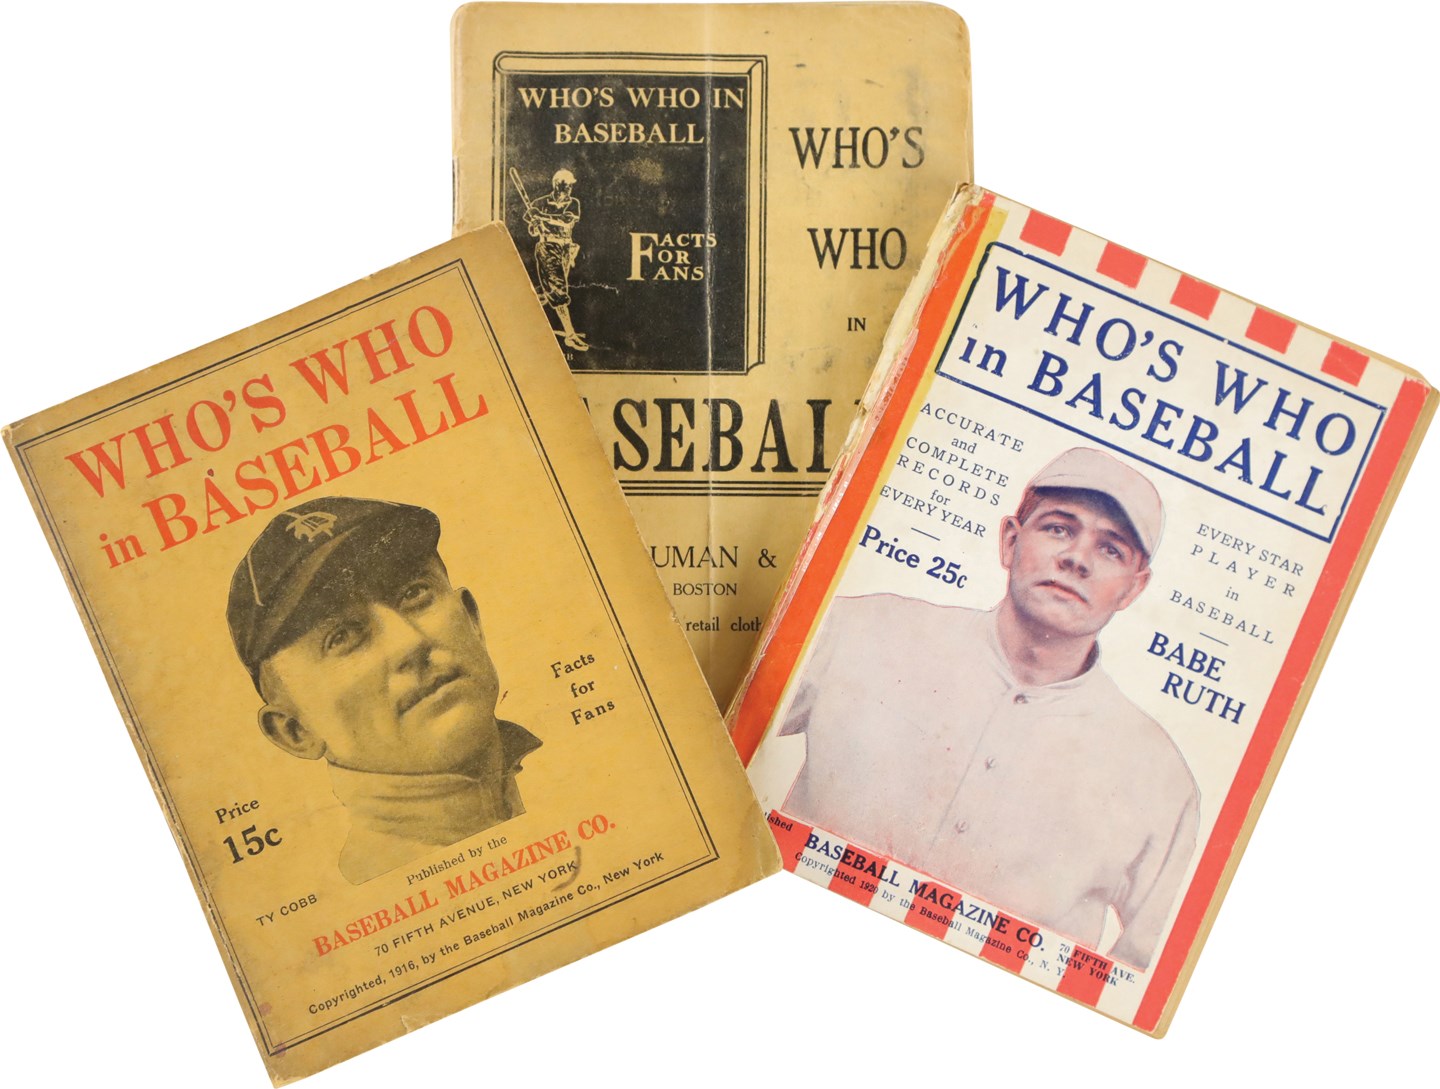 Baseball Memorabilia - Rare 1912 Who's Who in Baseball First Edition & Other Key Issues (3)